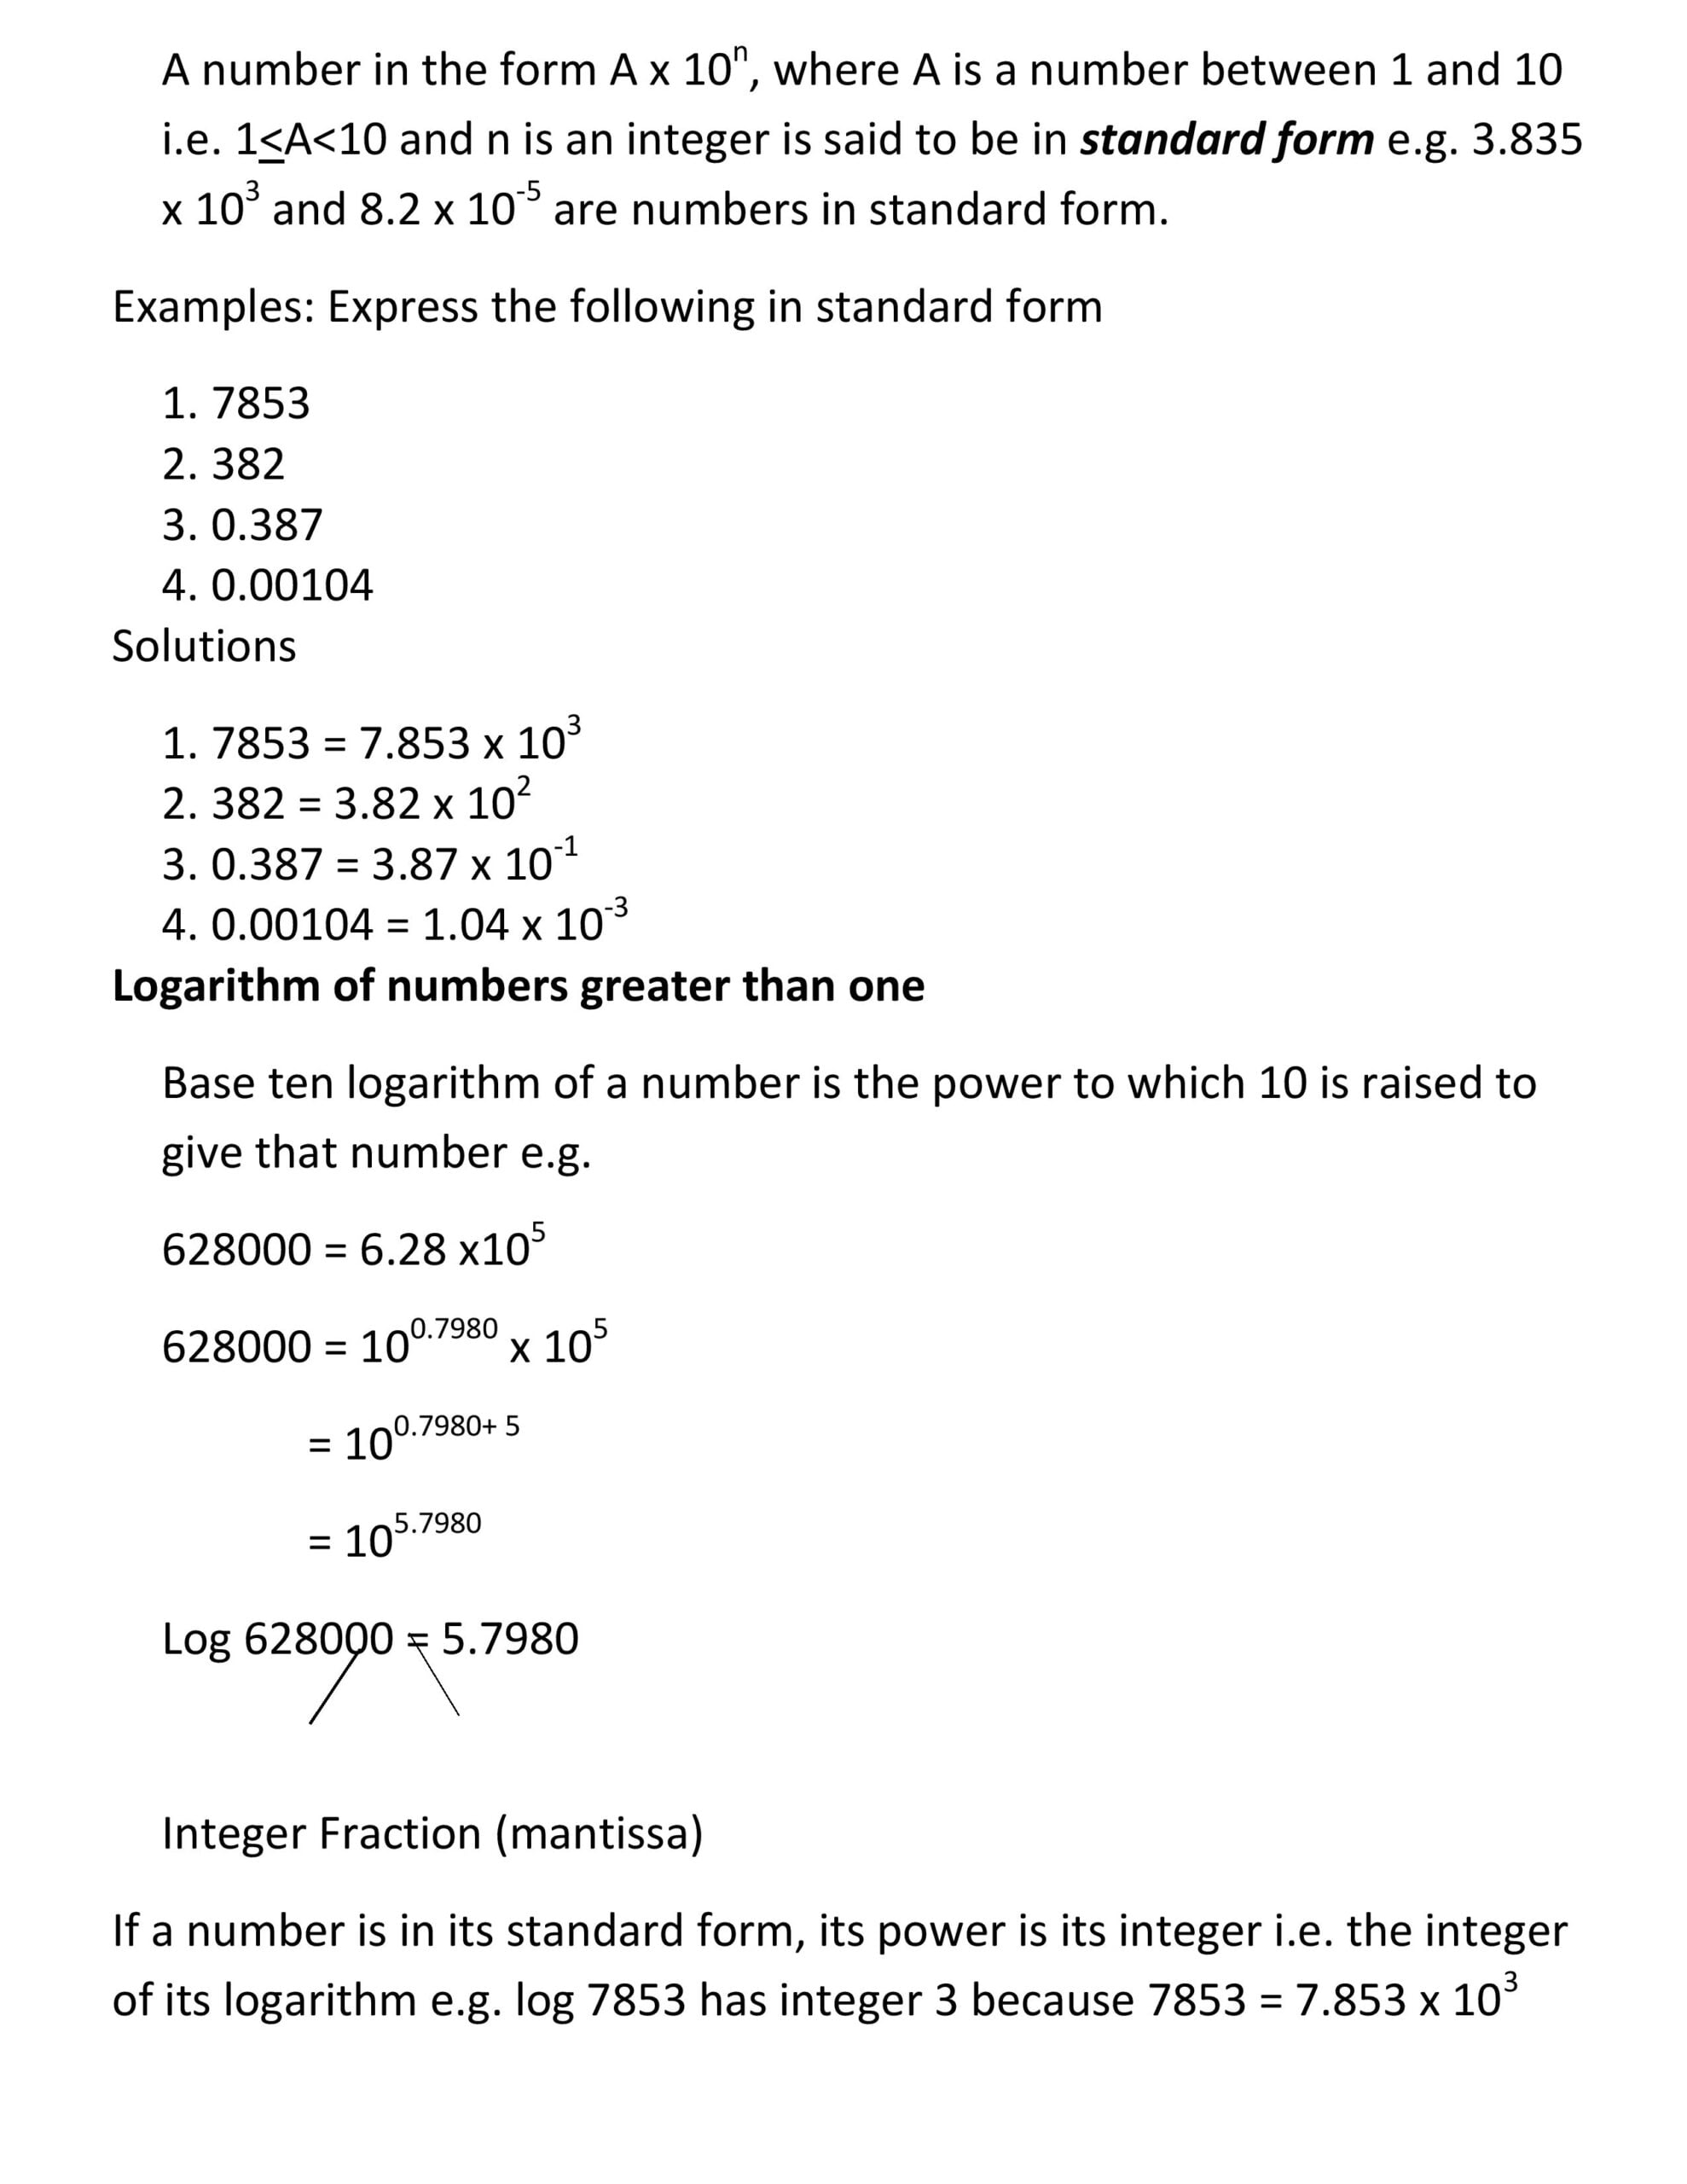 LOGARITHM OF NUMBERS LESS THAN ONE_2